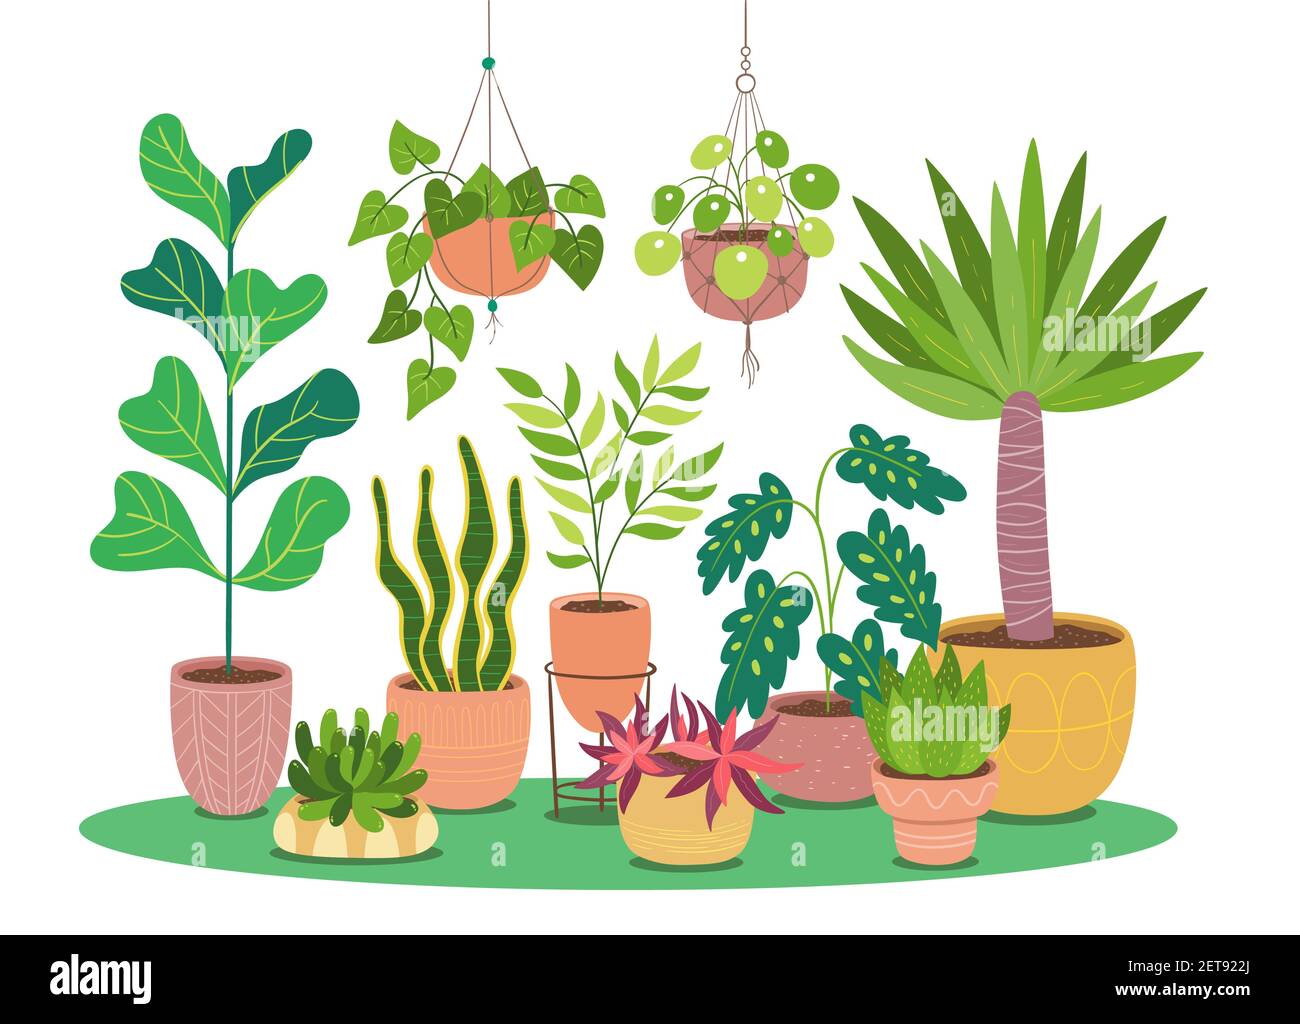 Decorative houseplants growing in pot. Vector illustration isolated on white background. Design elements easy to edit and rearrange. Landscape format. Stock Vector